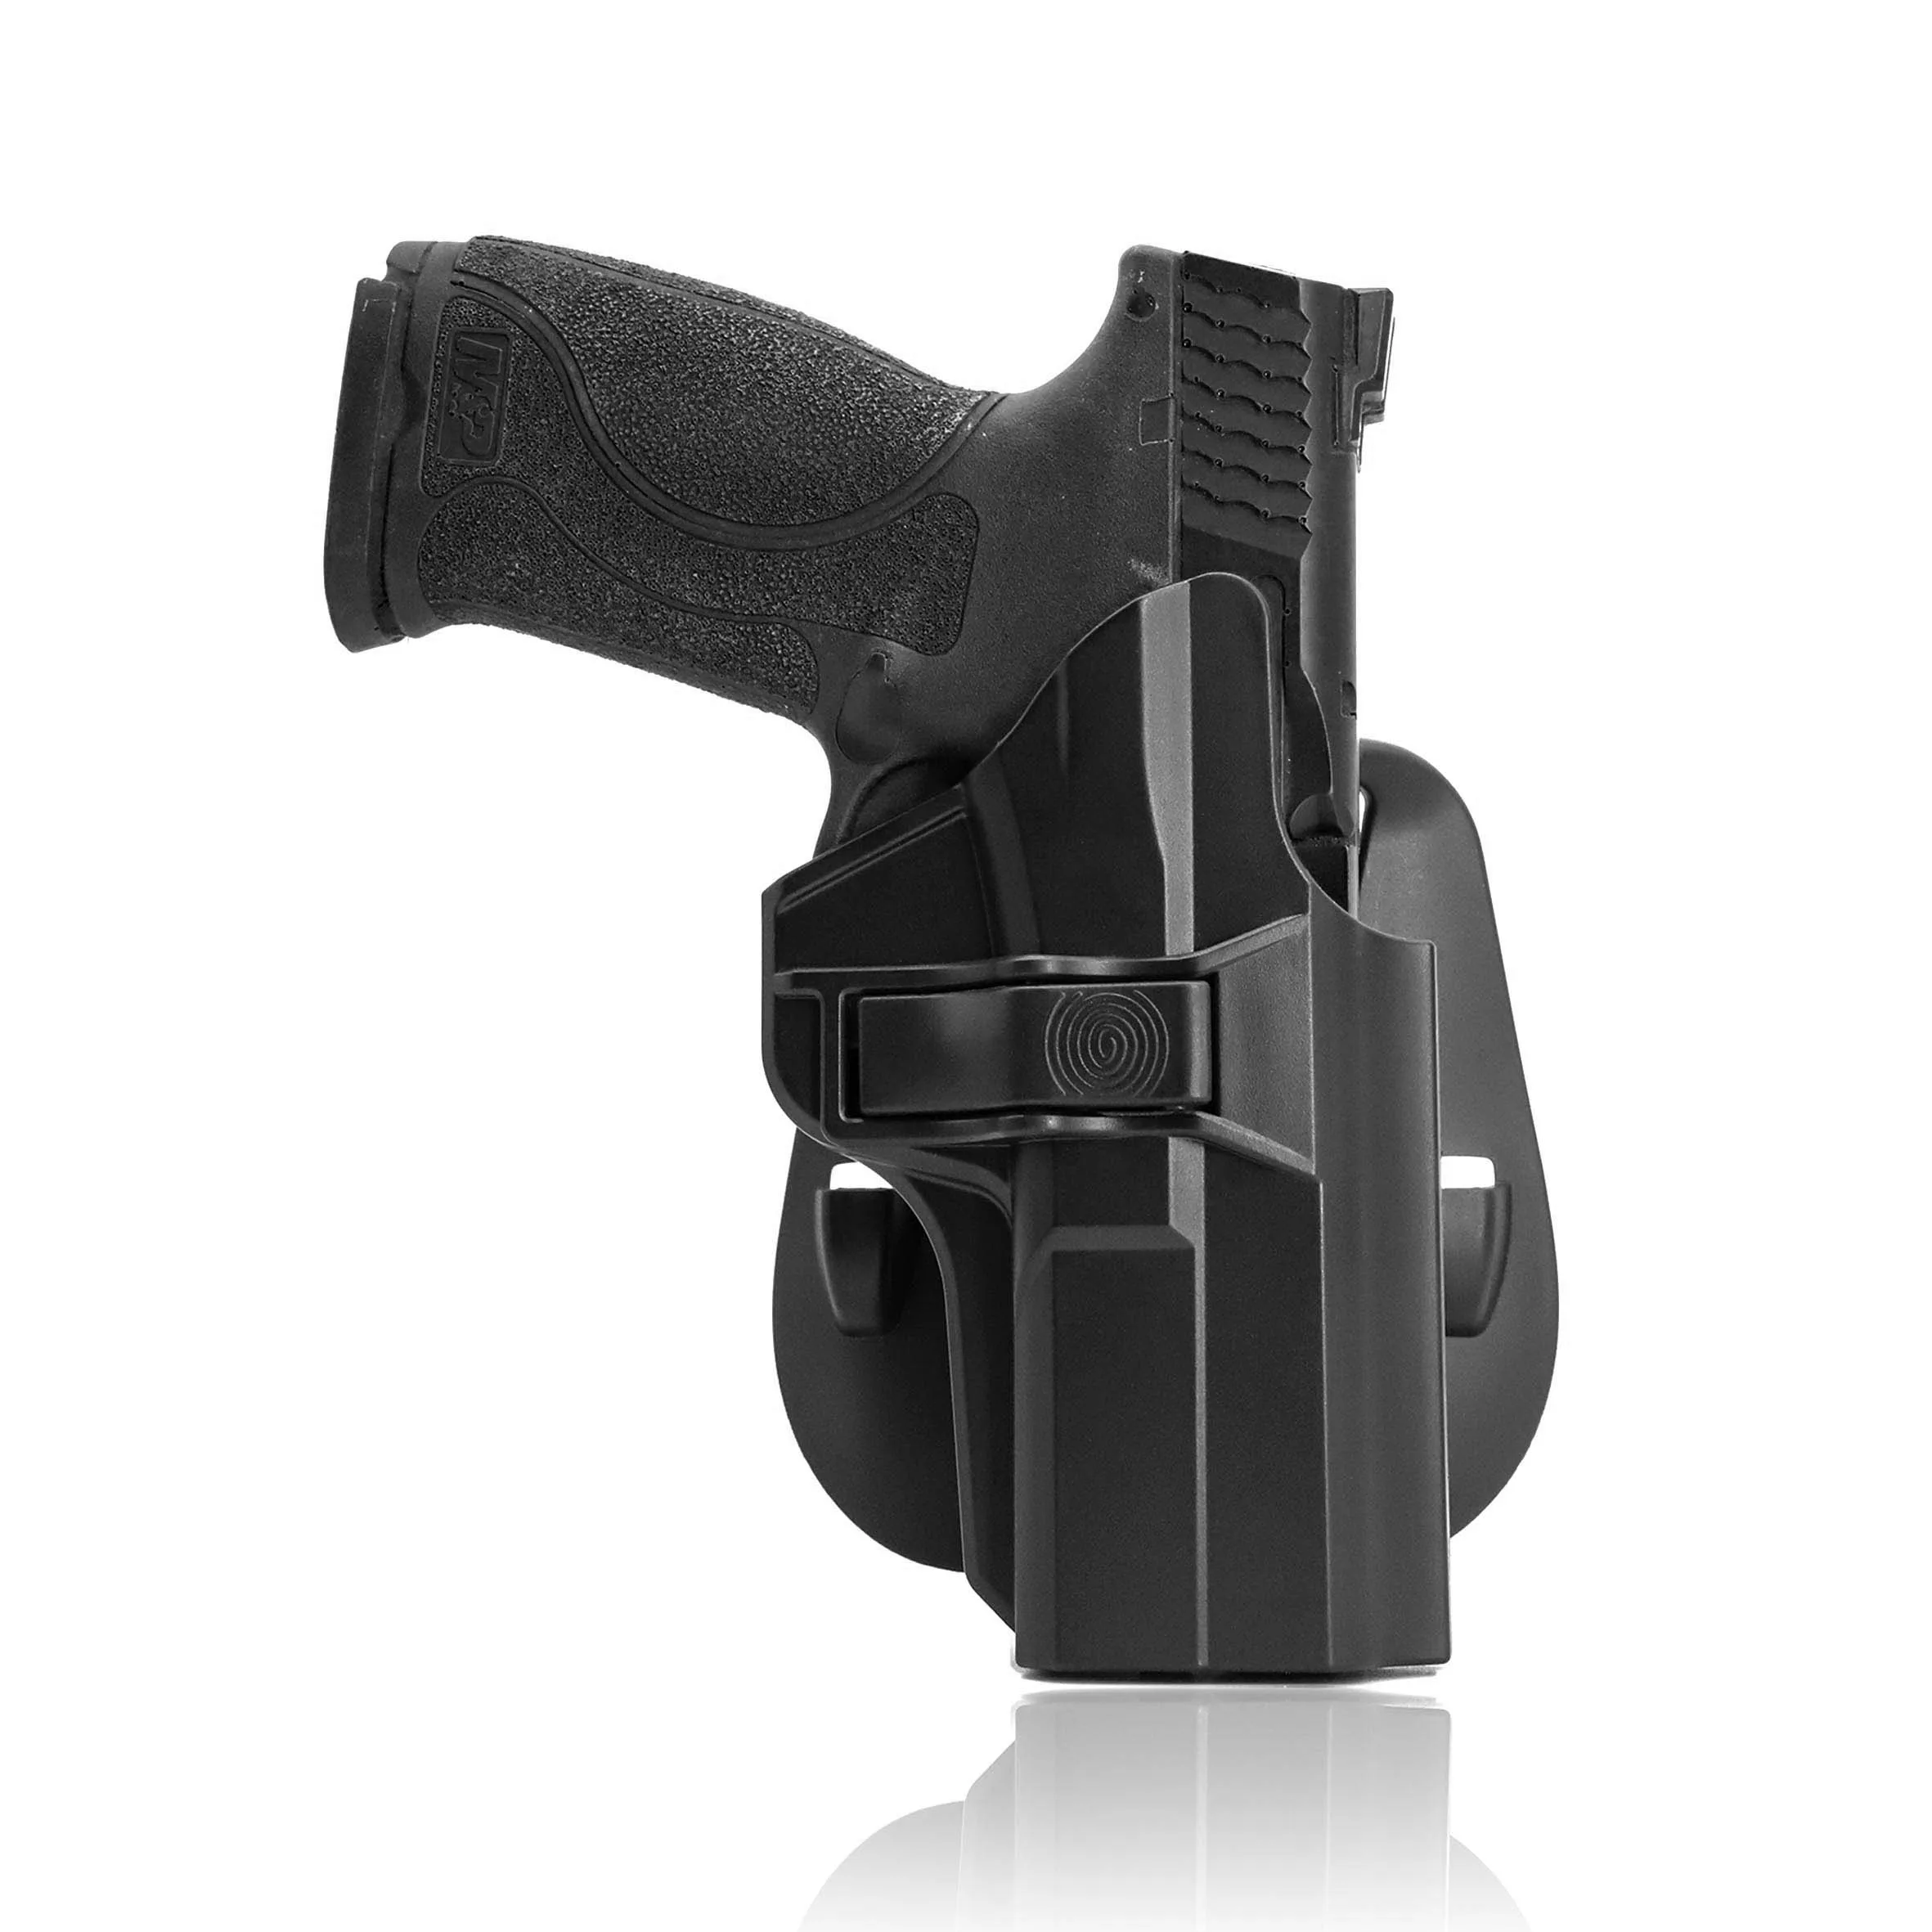 

TEGE OWB Jacket Concealed Gun Holster S&W M&P 9MM Matched Paddle Attachment Waist Band Gun Holster